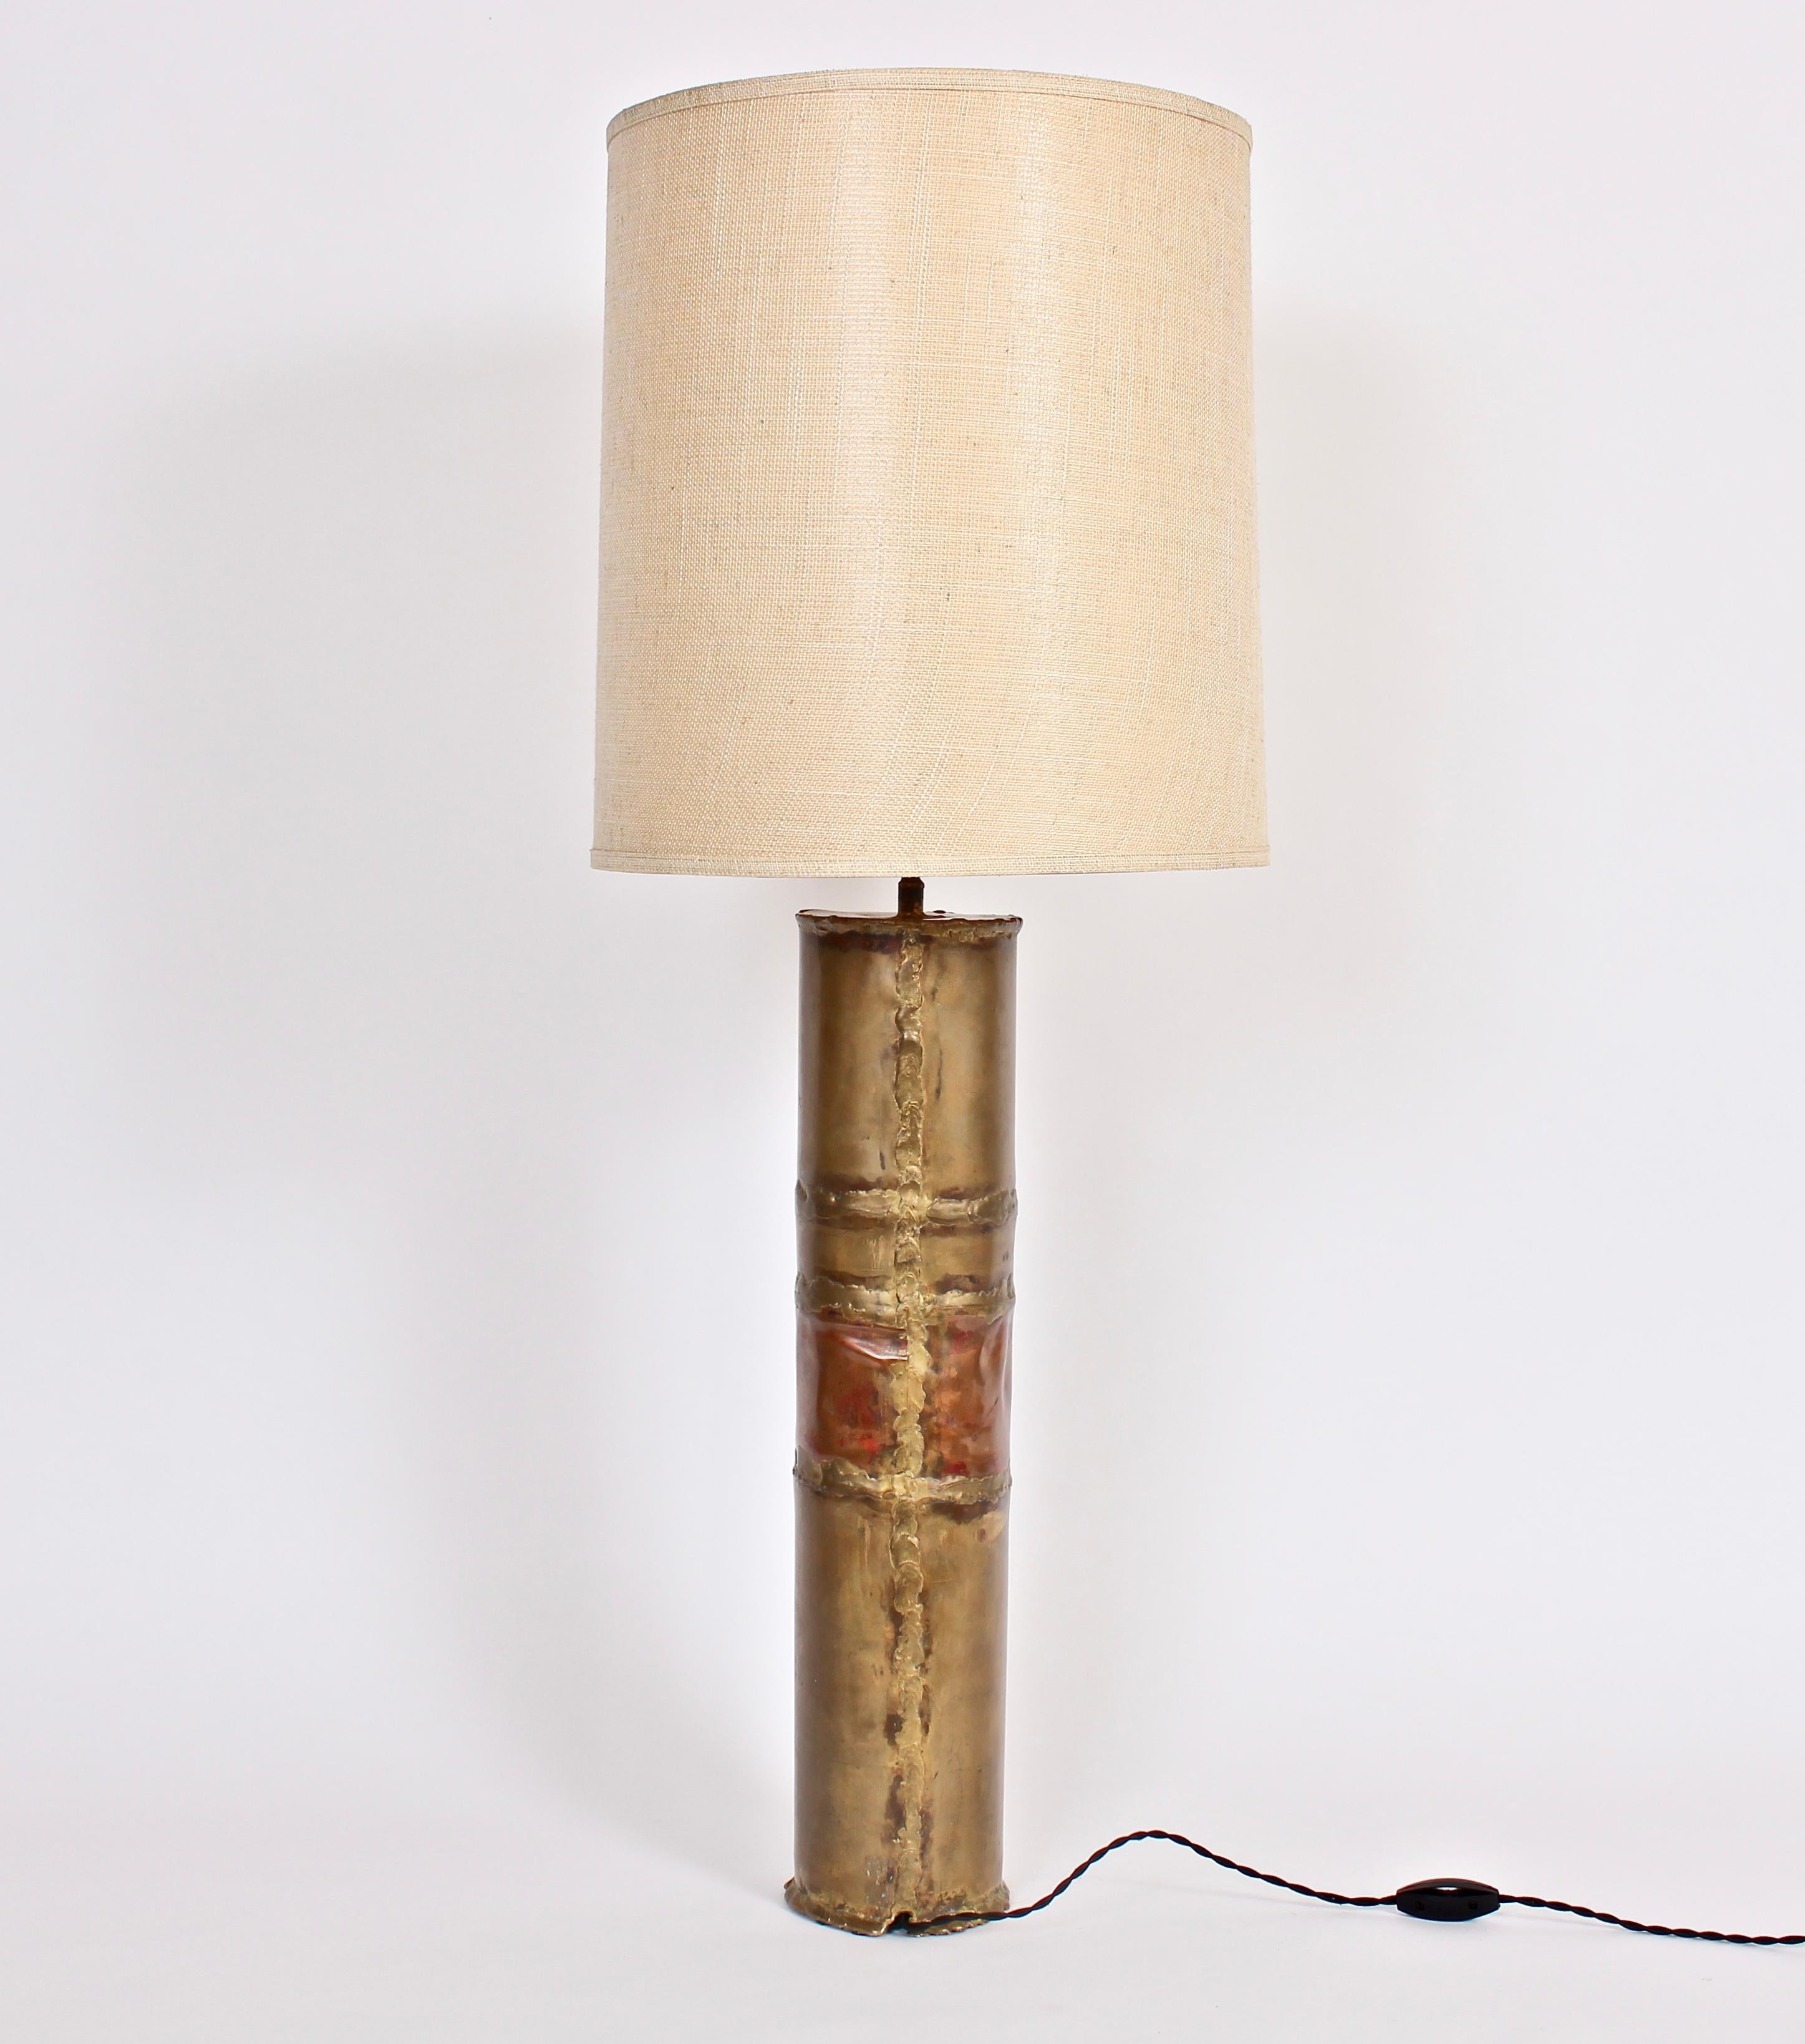 American Substantial Silas Seandel Torched Mixed Metal Brutalist Table Lamp, 1974 For Sale